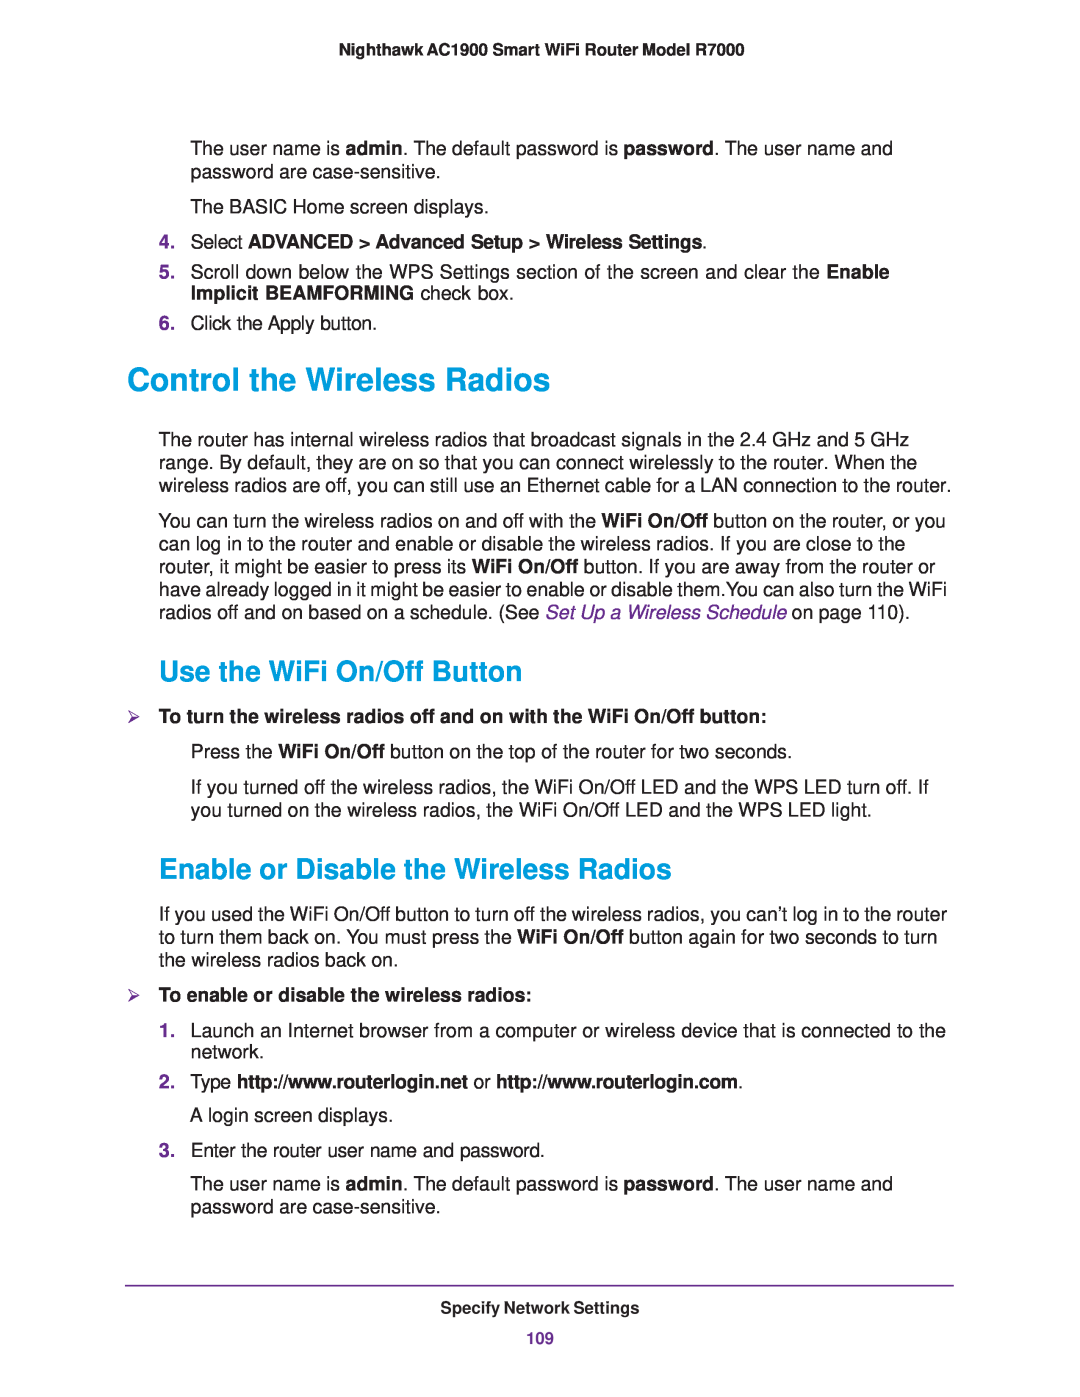 NETGEAR R7000 user manual Control the Wireless Radios, Use the WiFi On/Off Button, Enable or Disable the Wireless Radios 